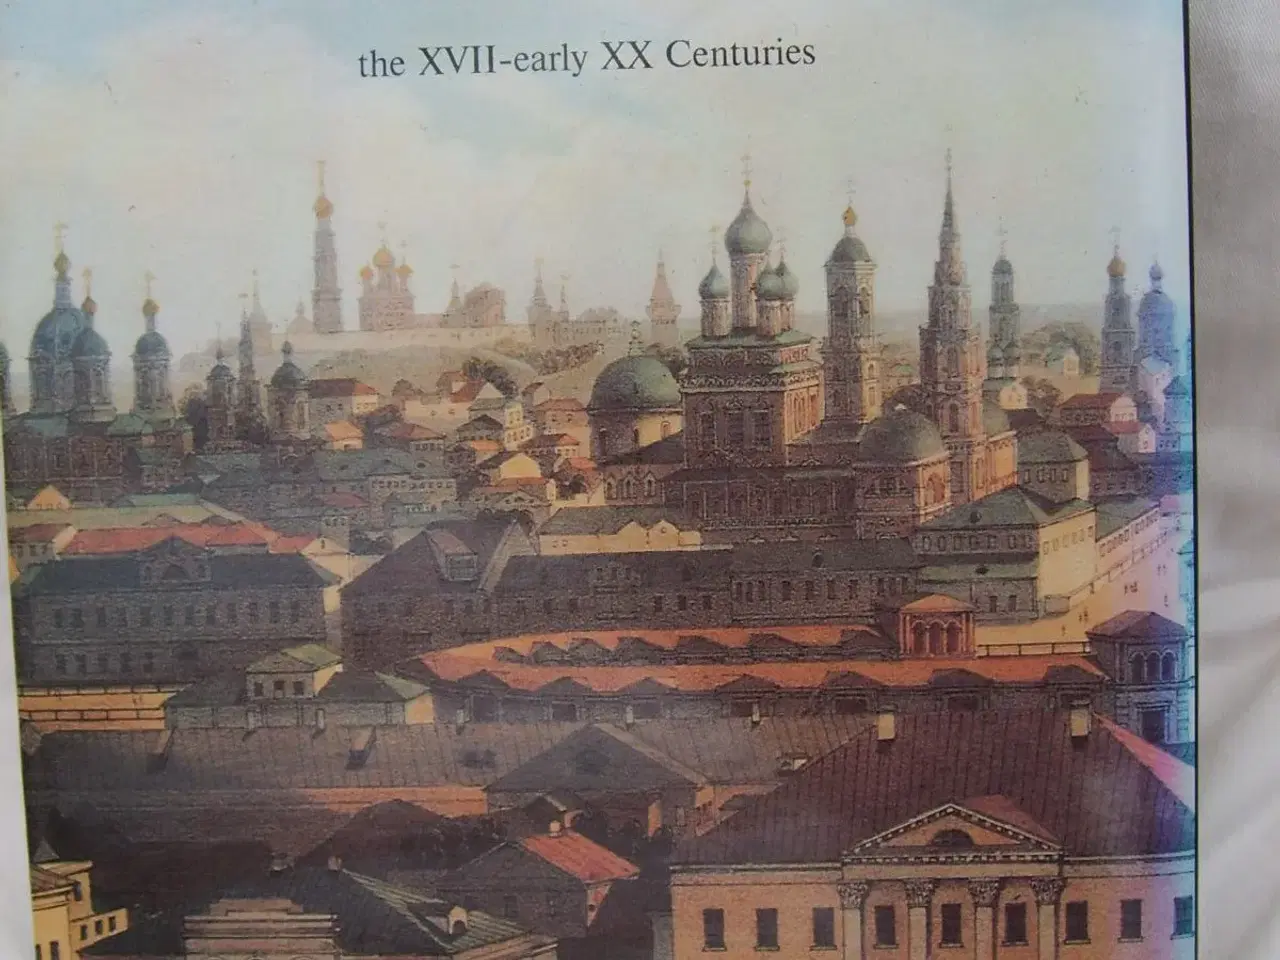 Billede 6 - Old Moscow Image XVII Early XX Centuries bog